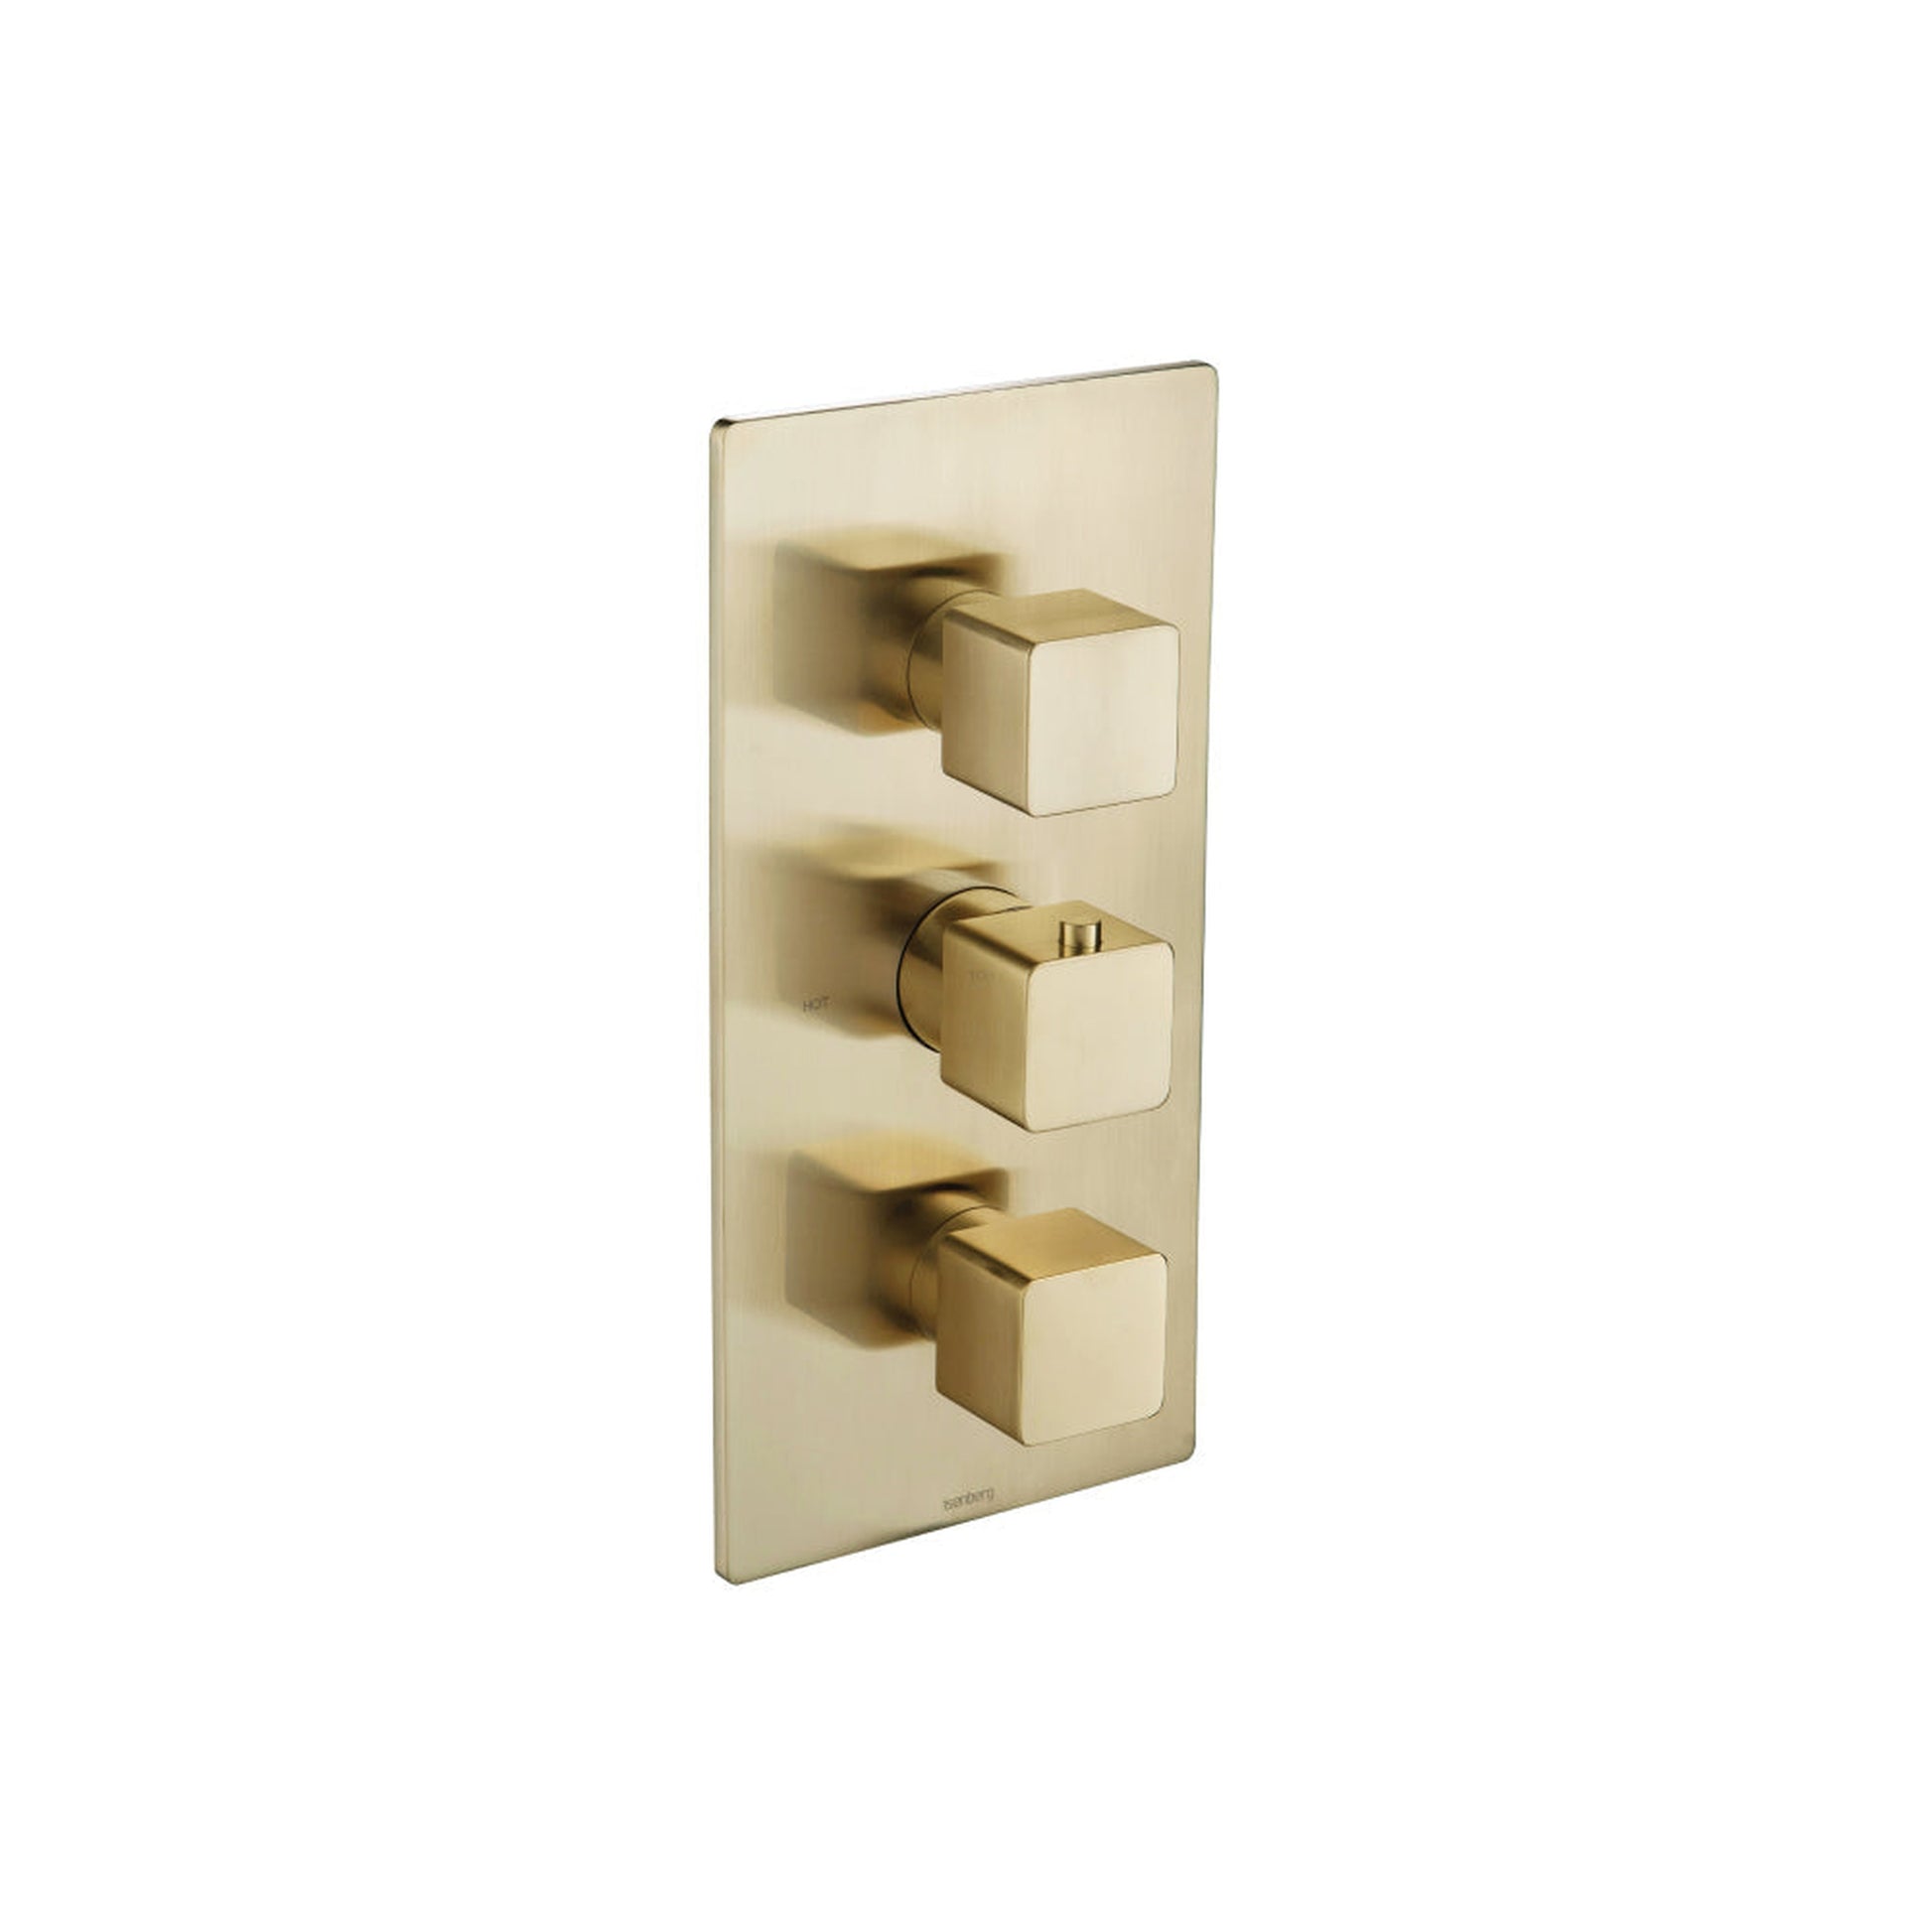 Isenberg Serie 196 3/4" Four Output Thermostatic Valve and Trim in Satin Brass